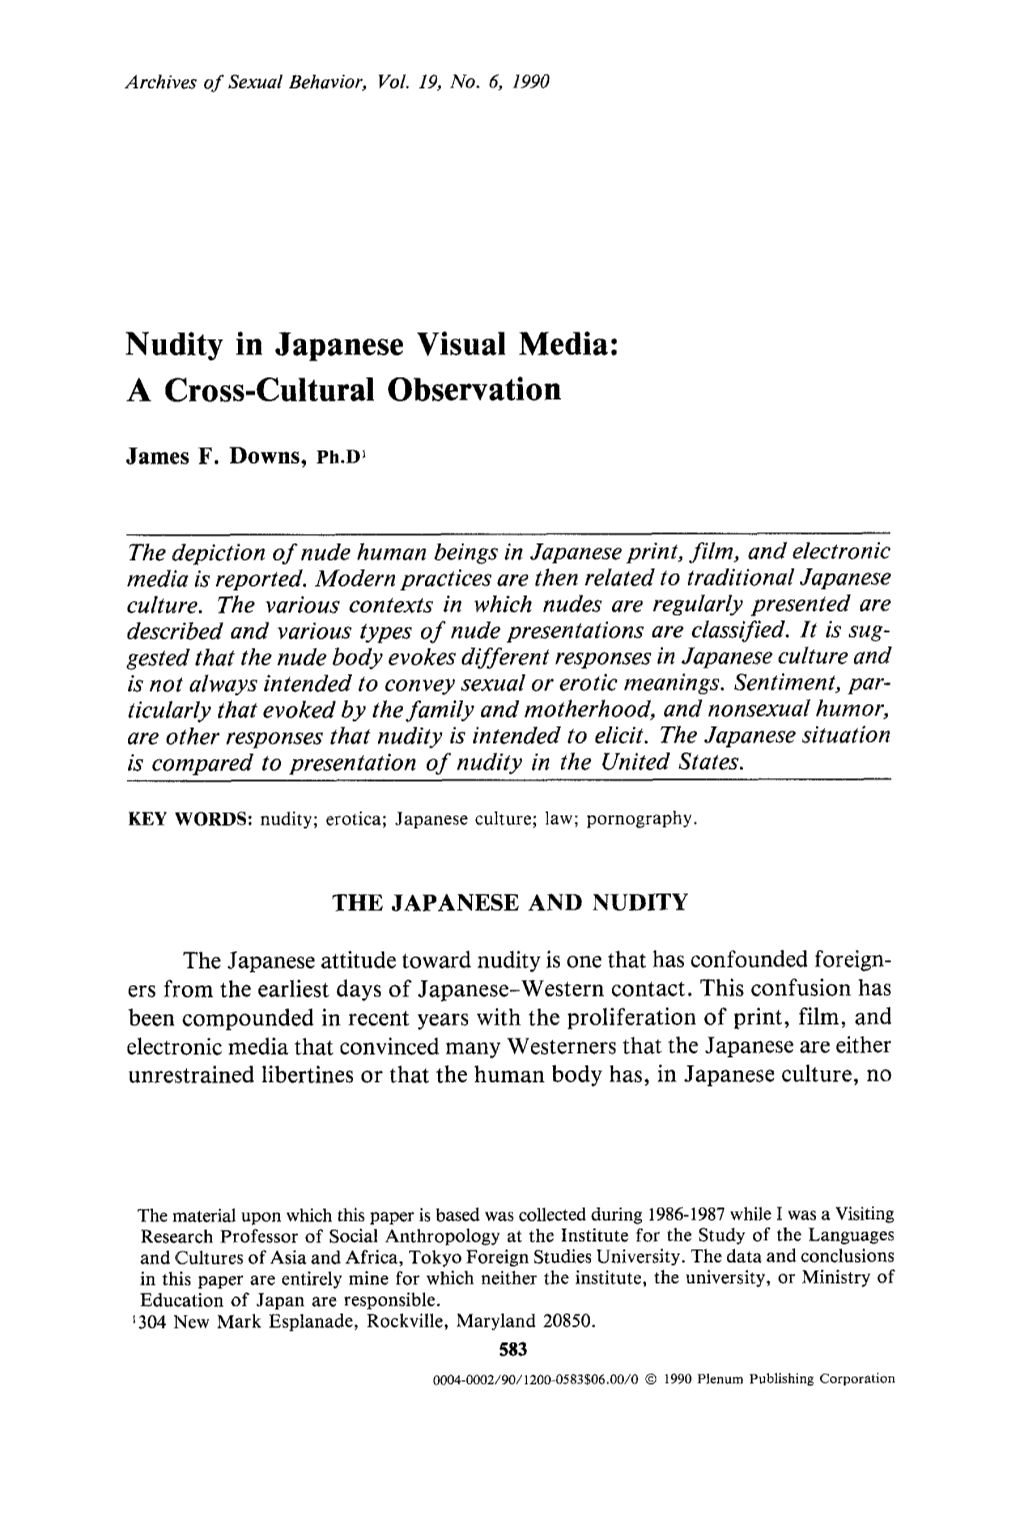 Nudity in Japanese Visual Media: a Cross-Cultural Observation